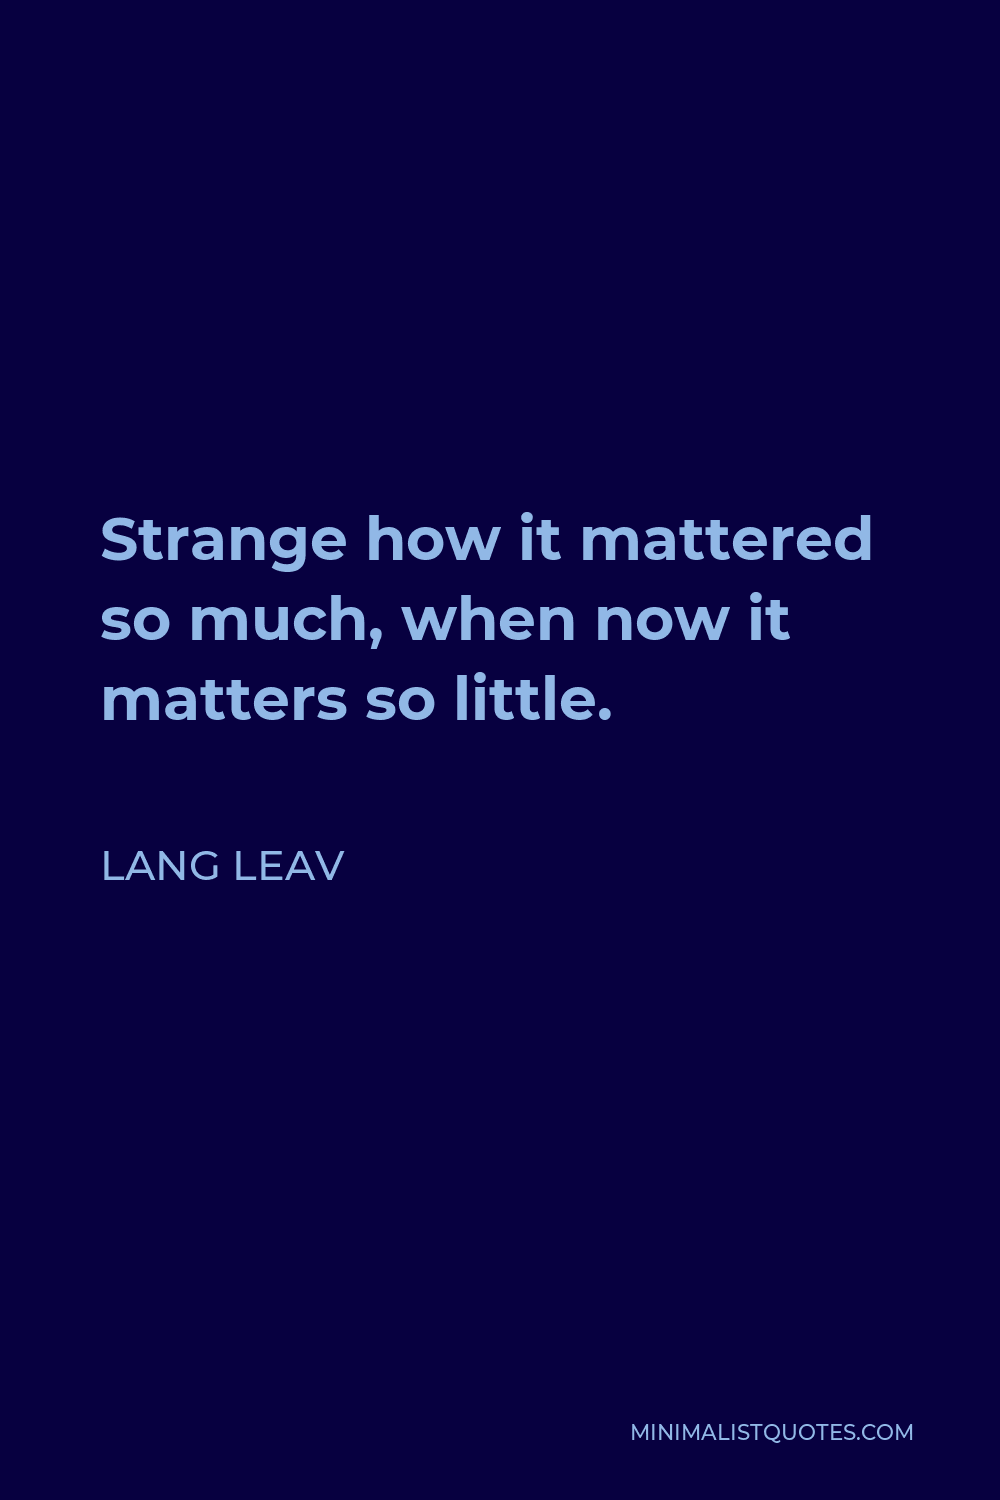 Lang Leav Quote - Strange how it mattered so much, when now it matters so little.